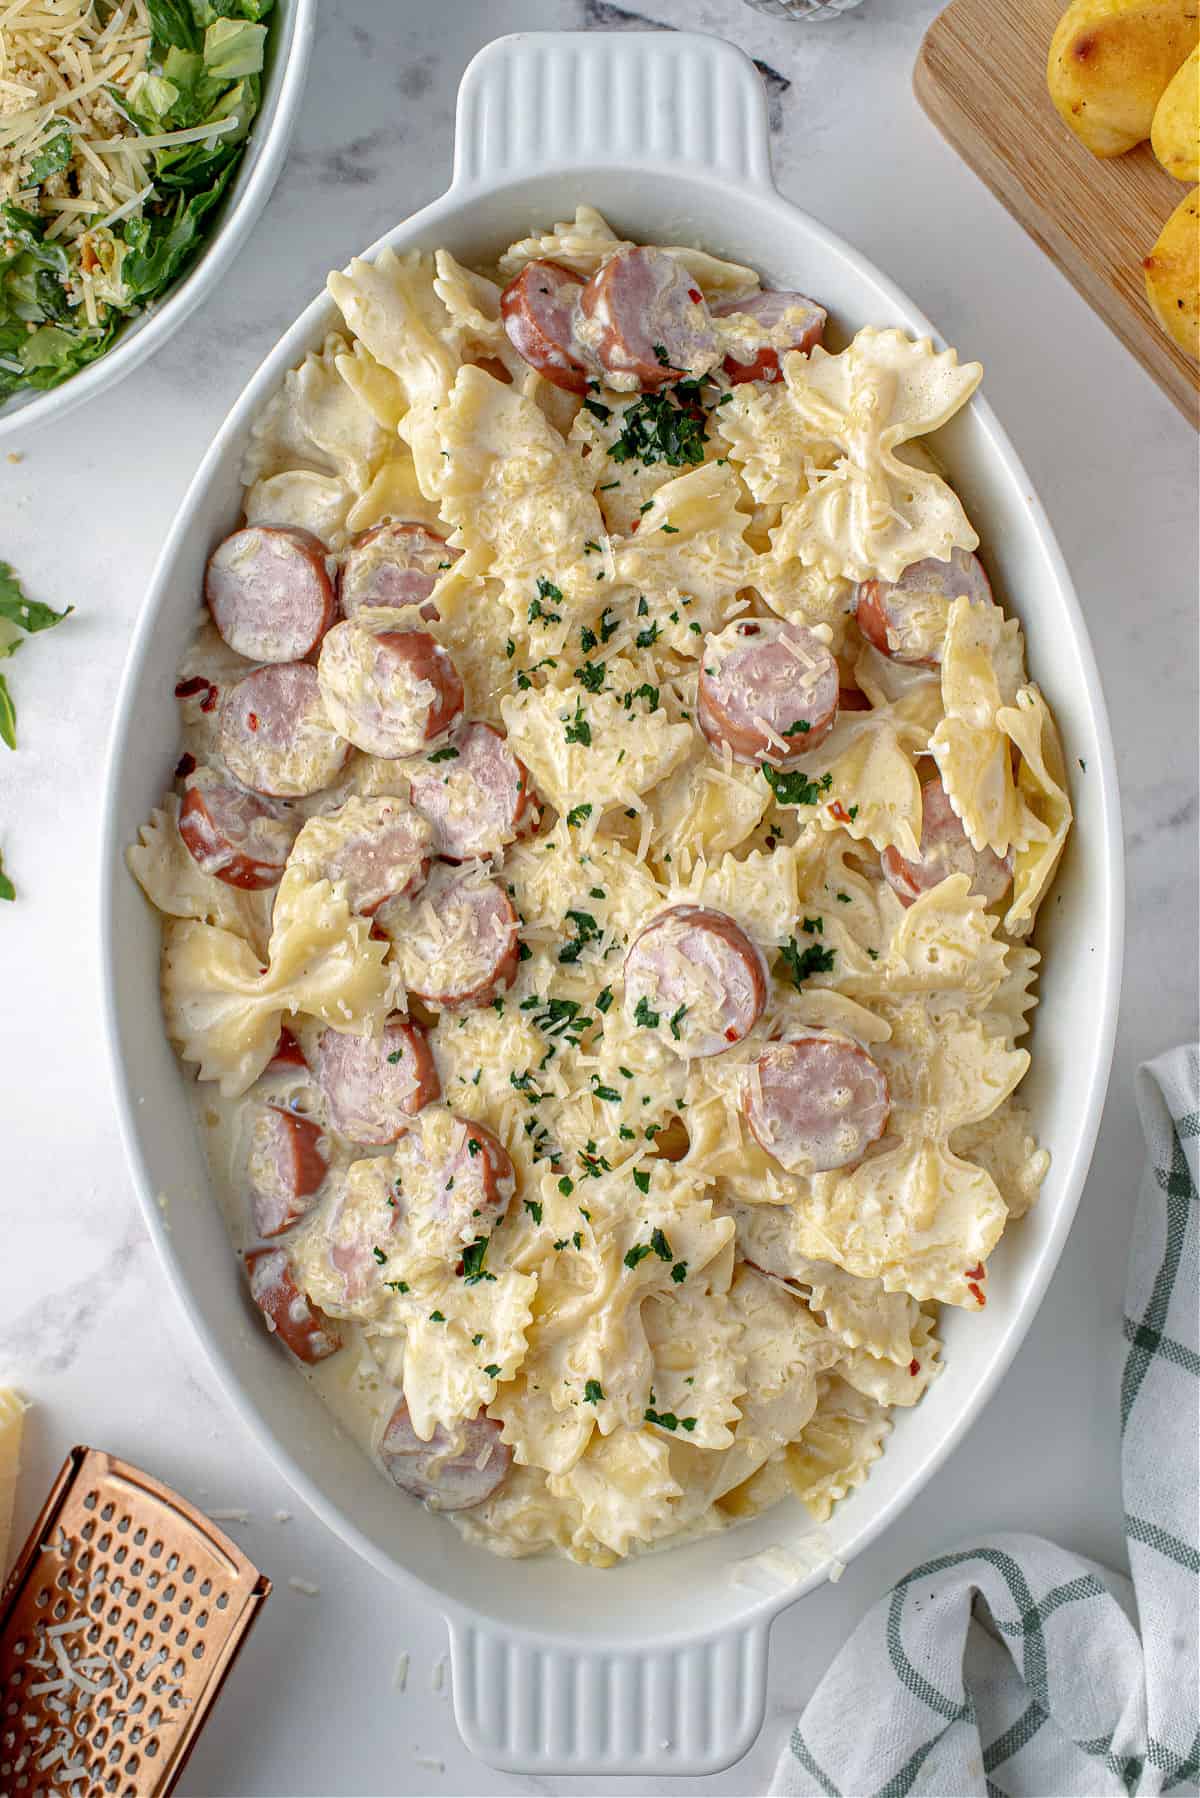 Sausage alfredo pasta served in a large oval baking dish.